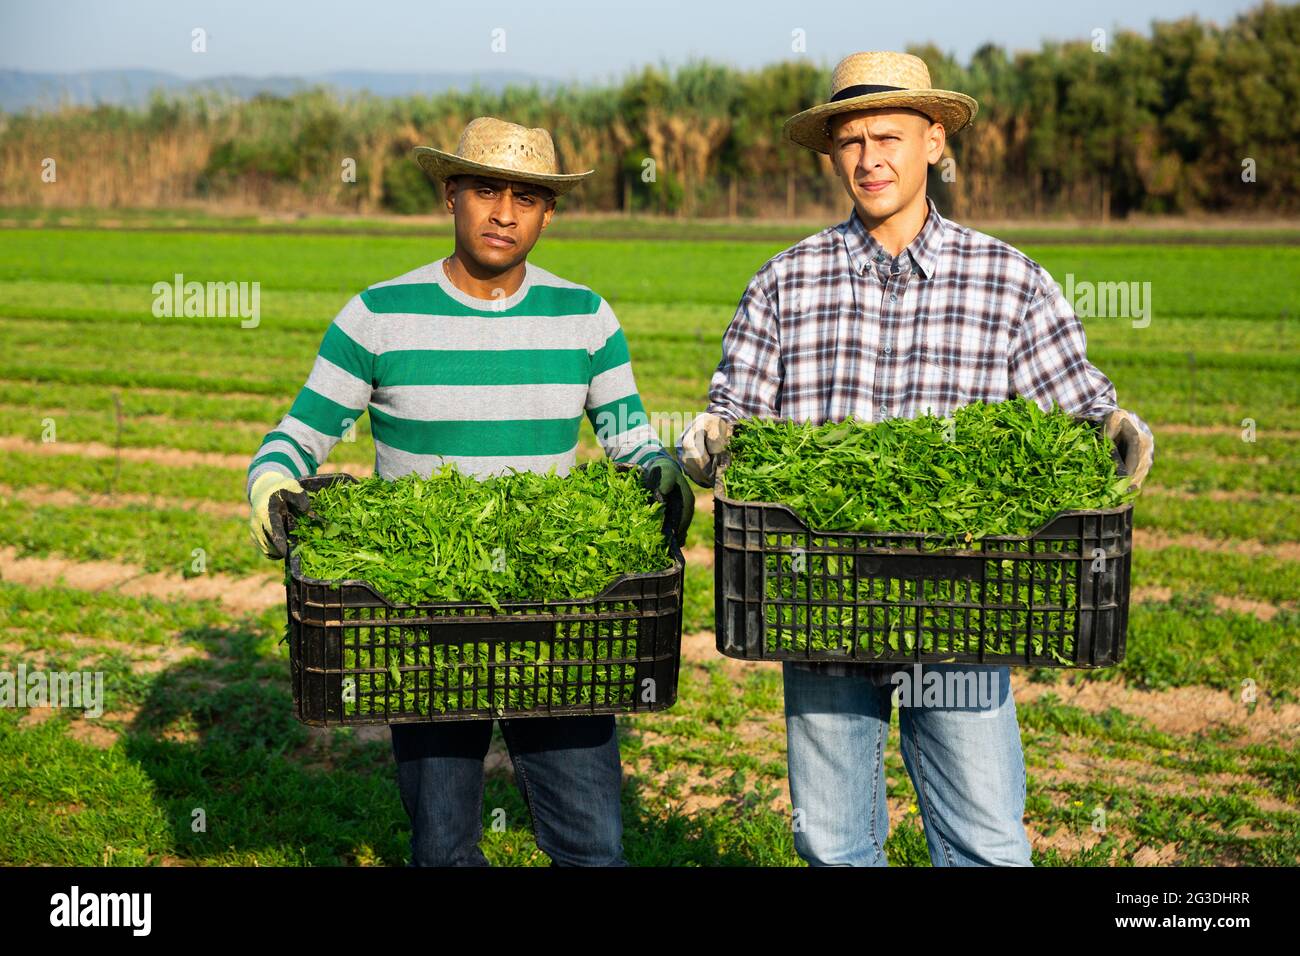 Two farmers showing rich harvest of green arugula on field Stock Photo